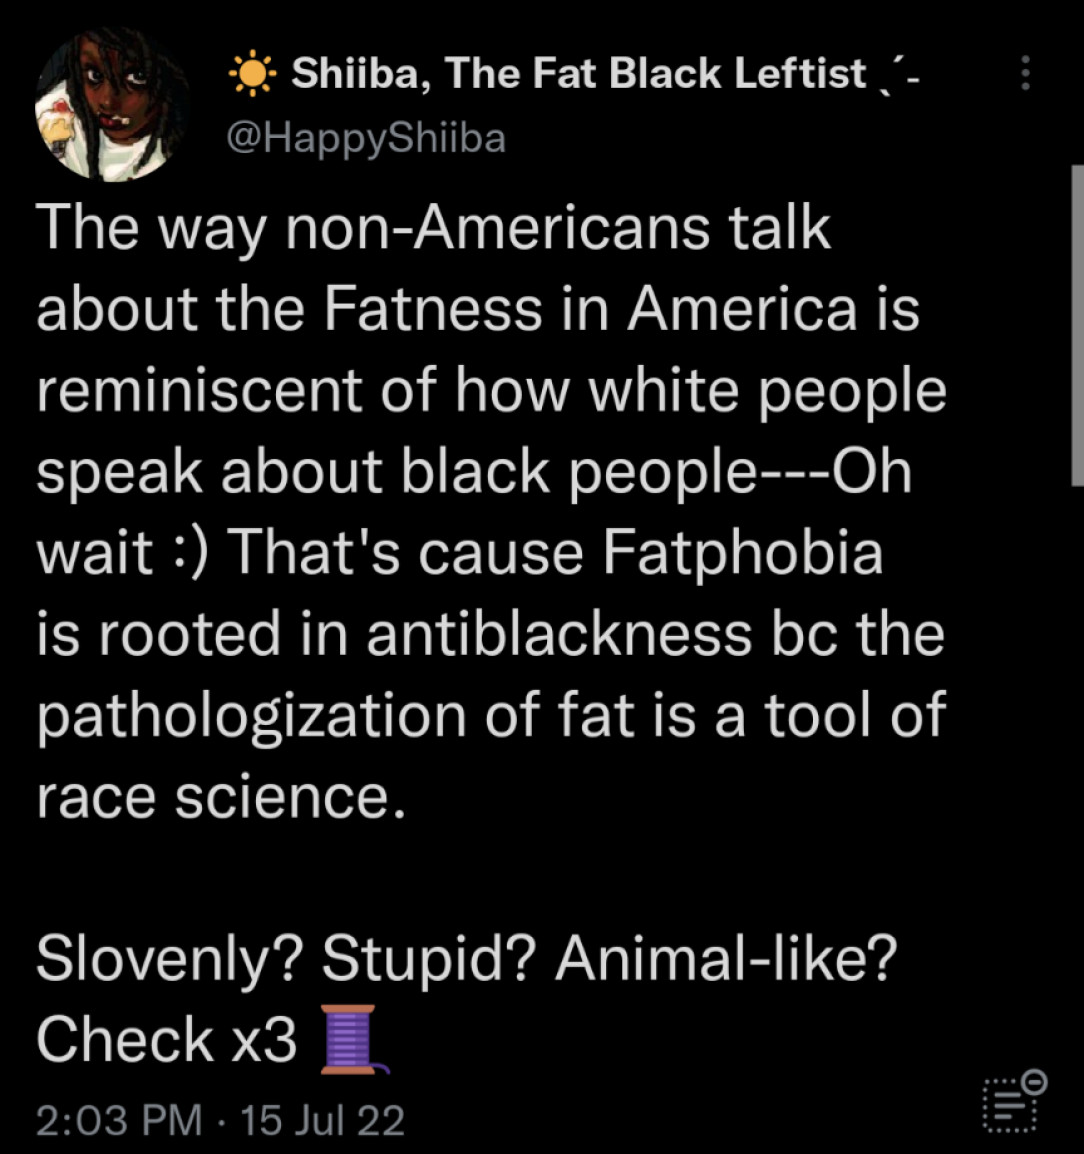 So saying &quot;obese&quot;, which is a clinical term, is now anti-Black?